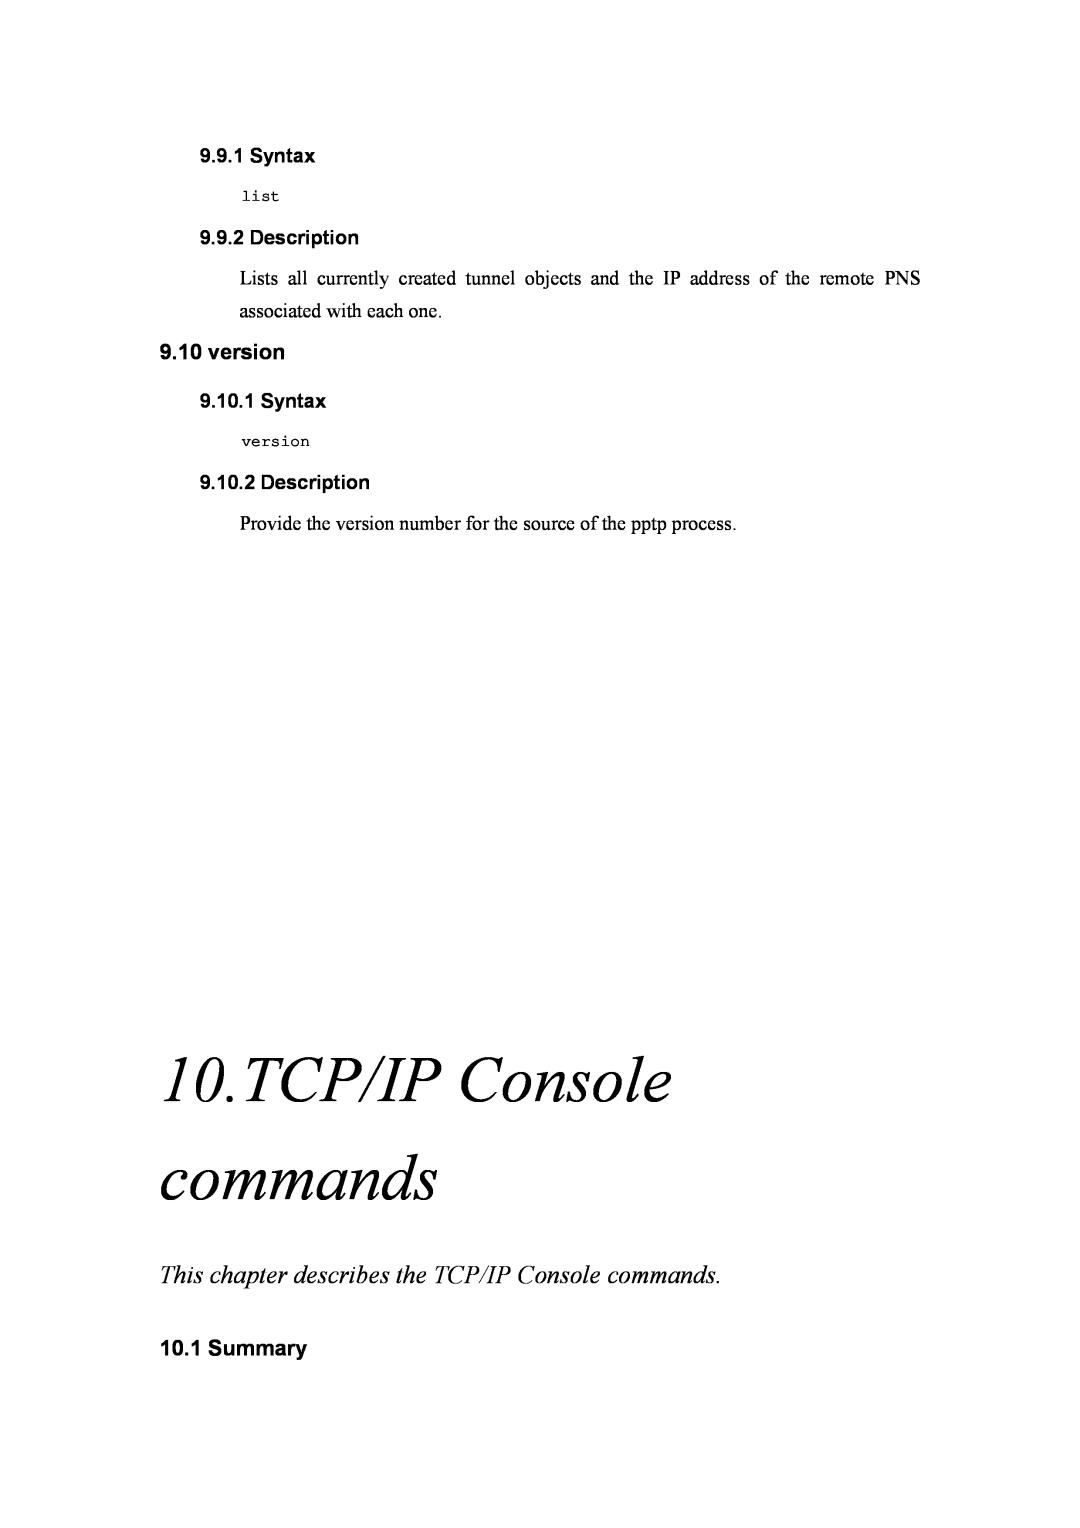 Atlantis Land A02-RA(Atmos)_ME01 10.TCP/IP Console commands, This chapter describes the TCP/IP Console commands, version 